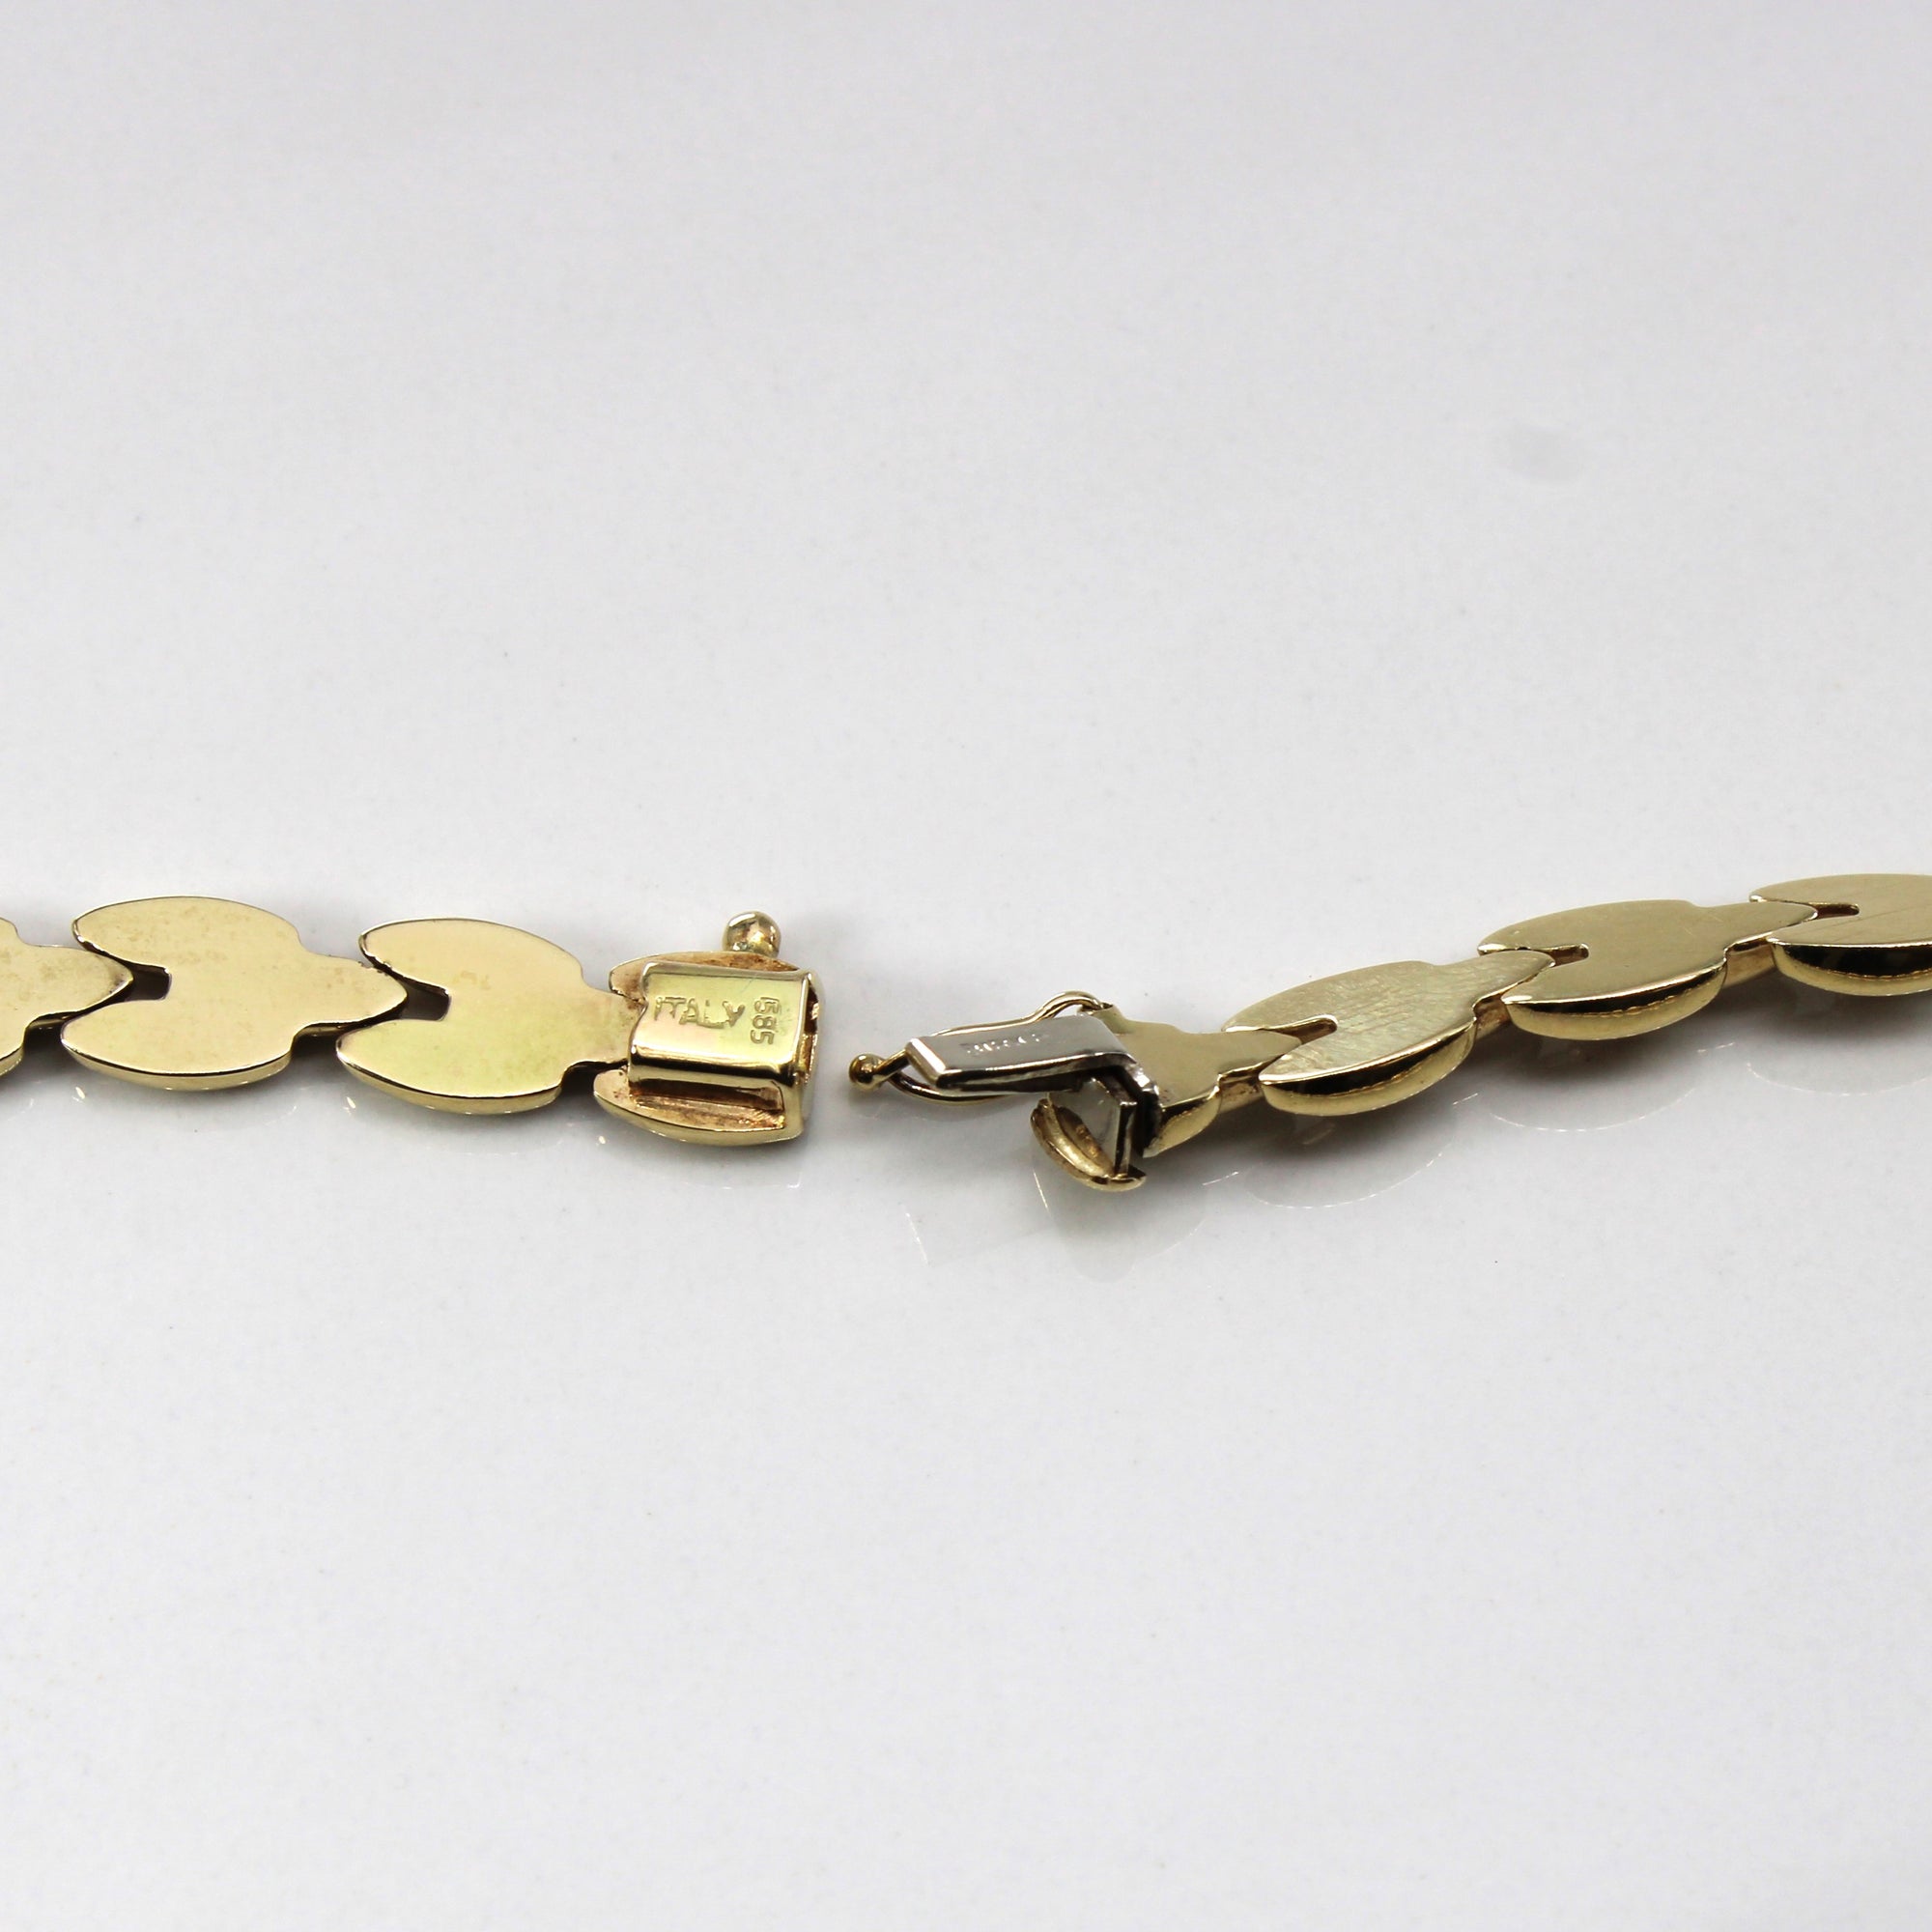 14k Yellow Gold Panther Chain | 14.5